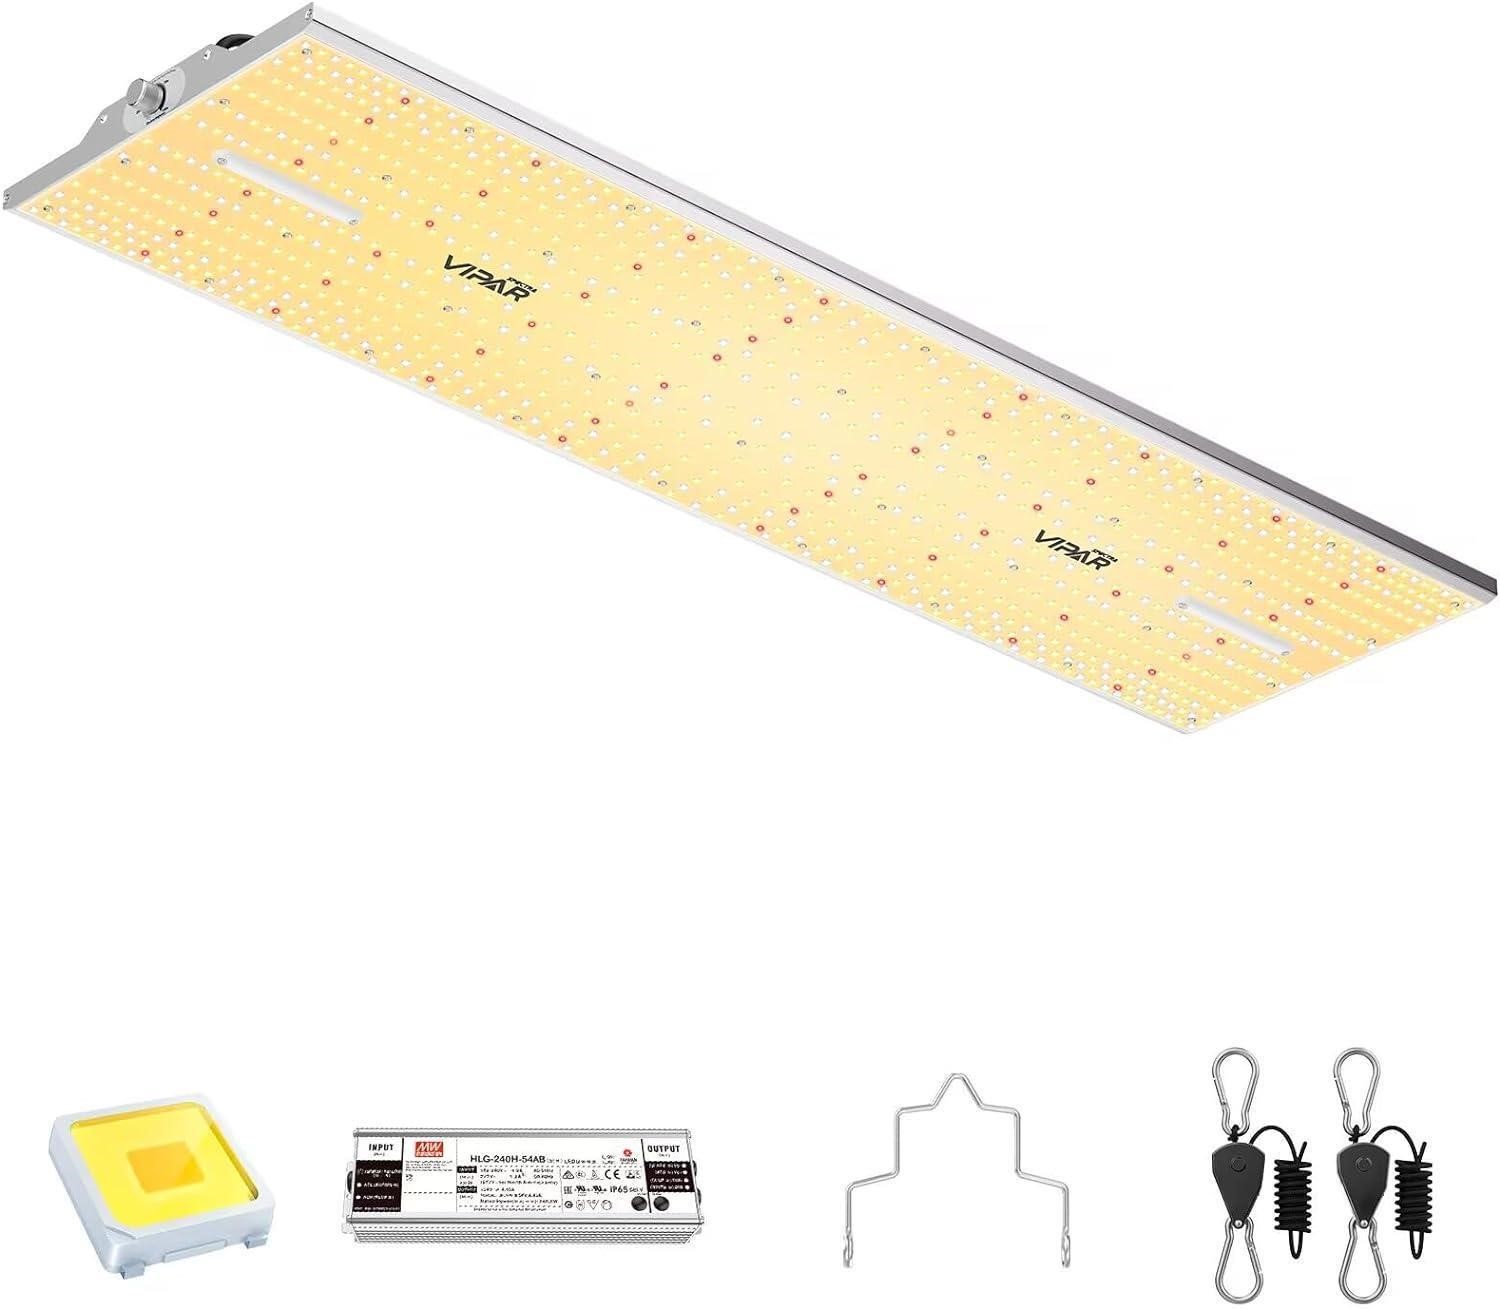 VIPARSPECTRA XS4000 400W LED Grow Light